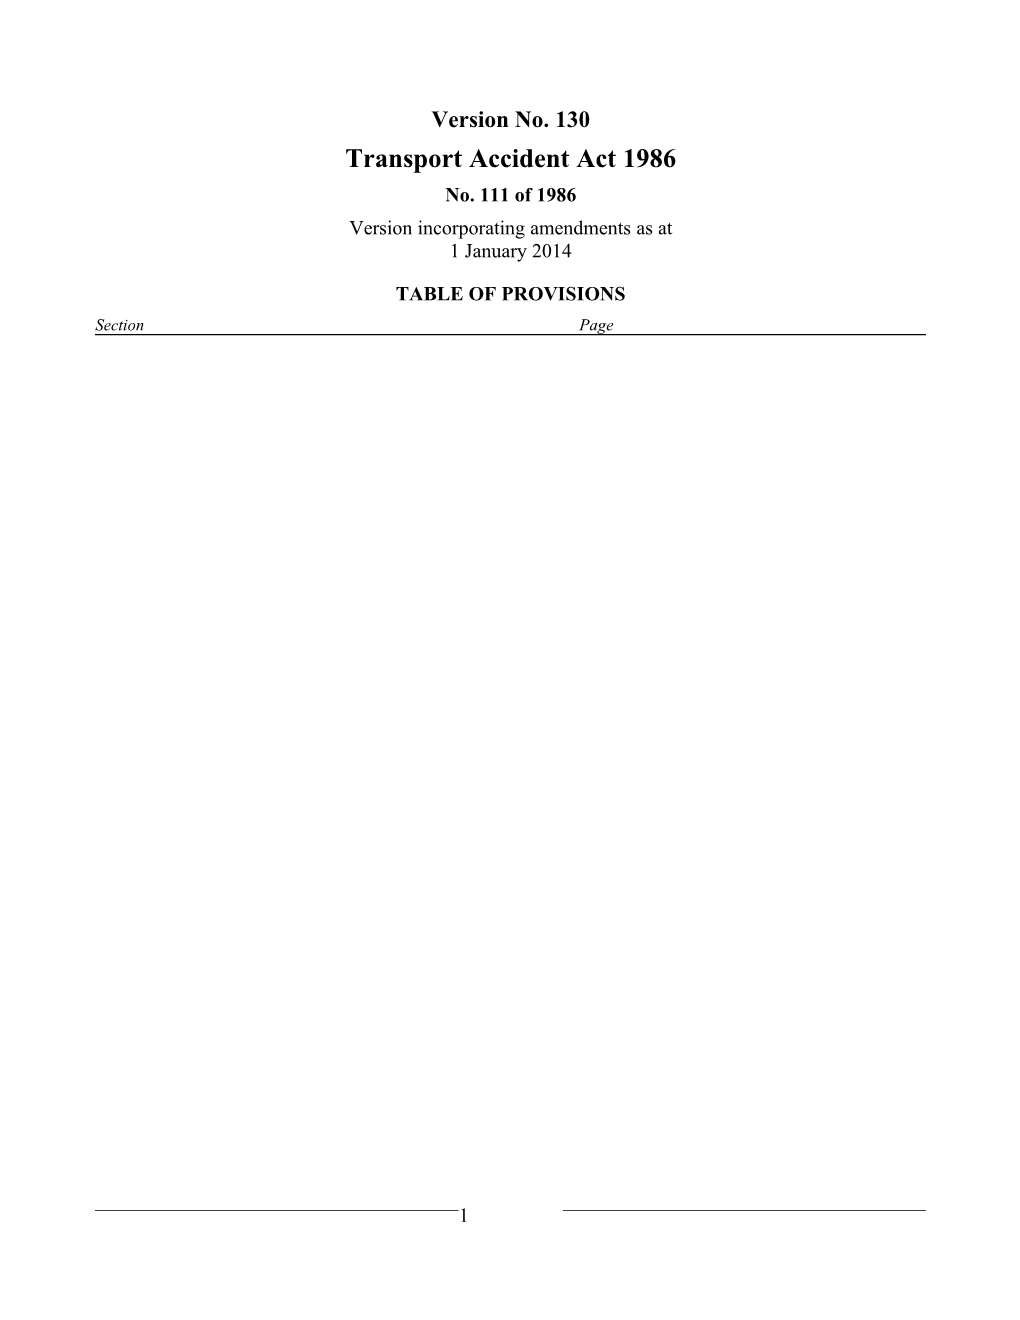 Transport Accident Act 1986